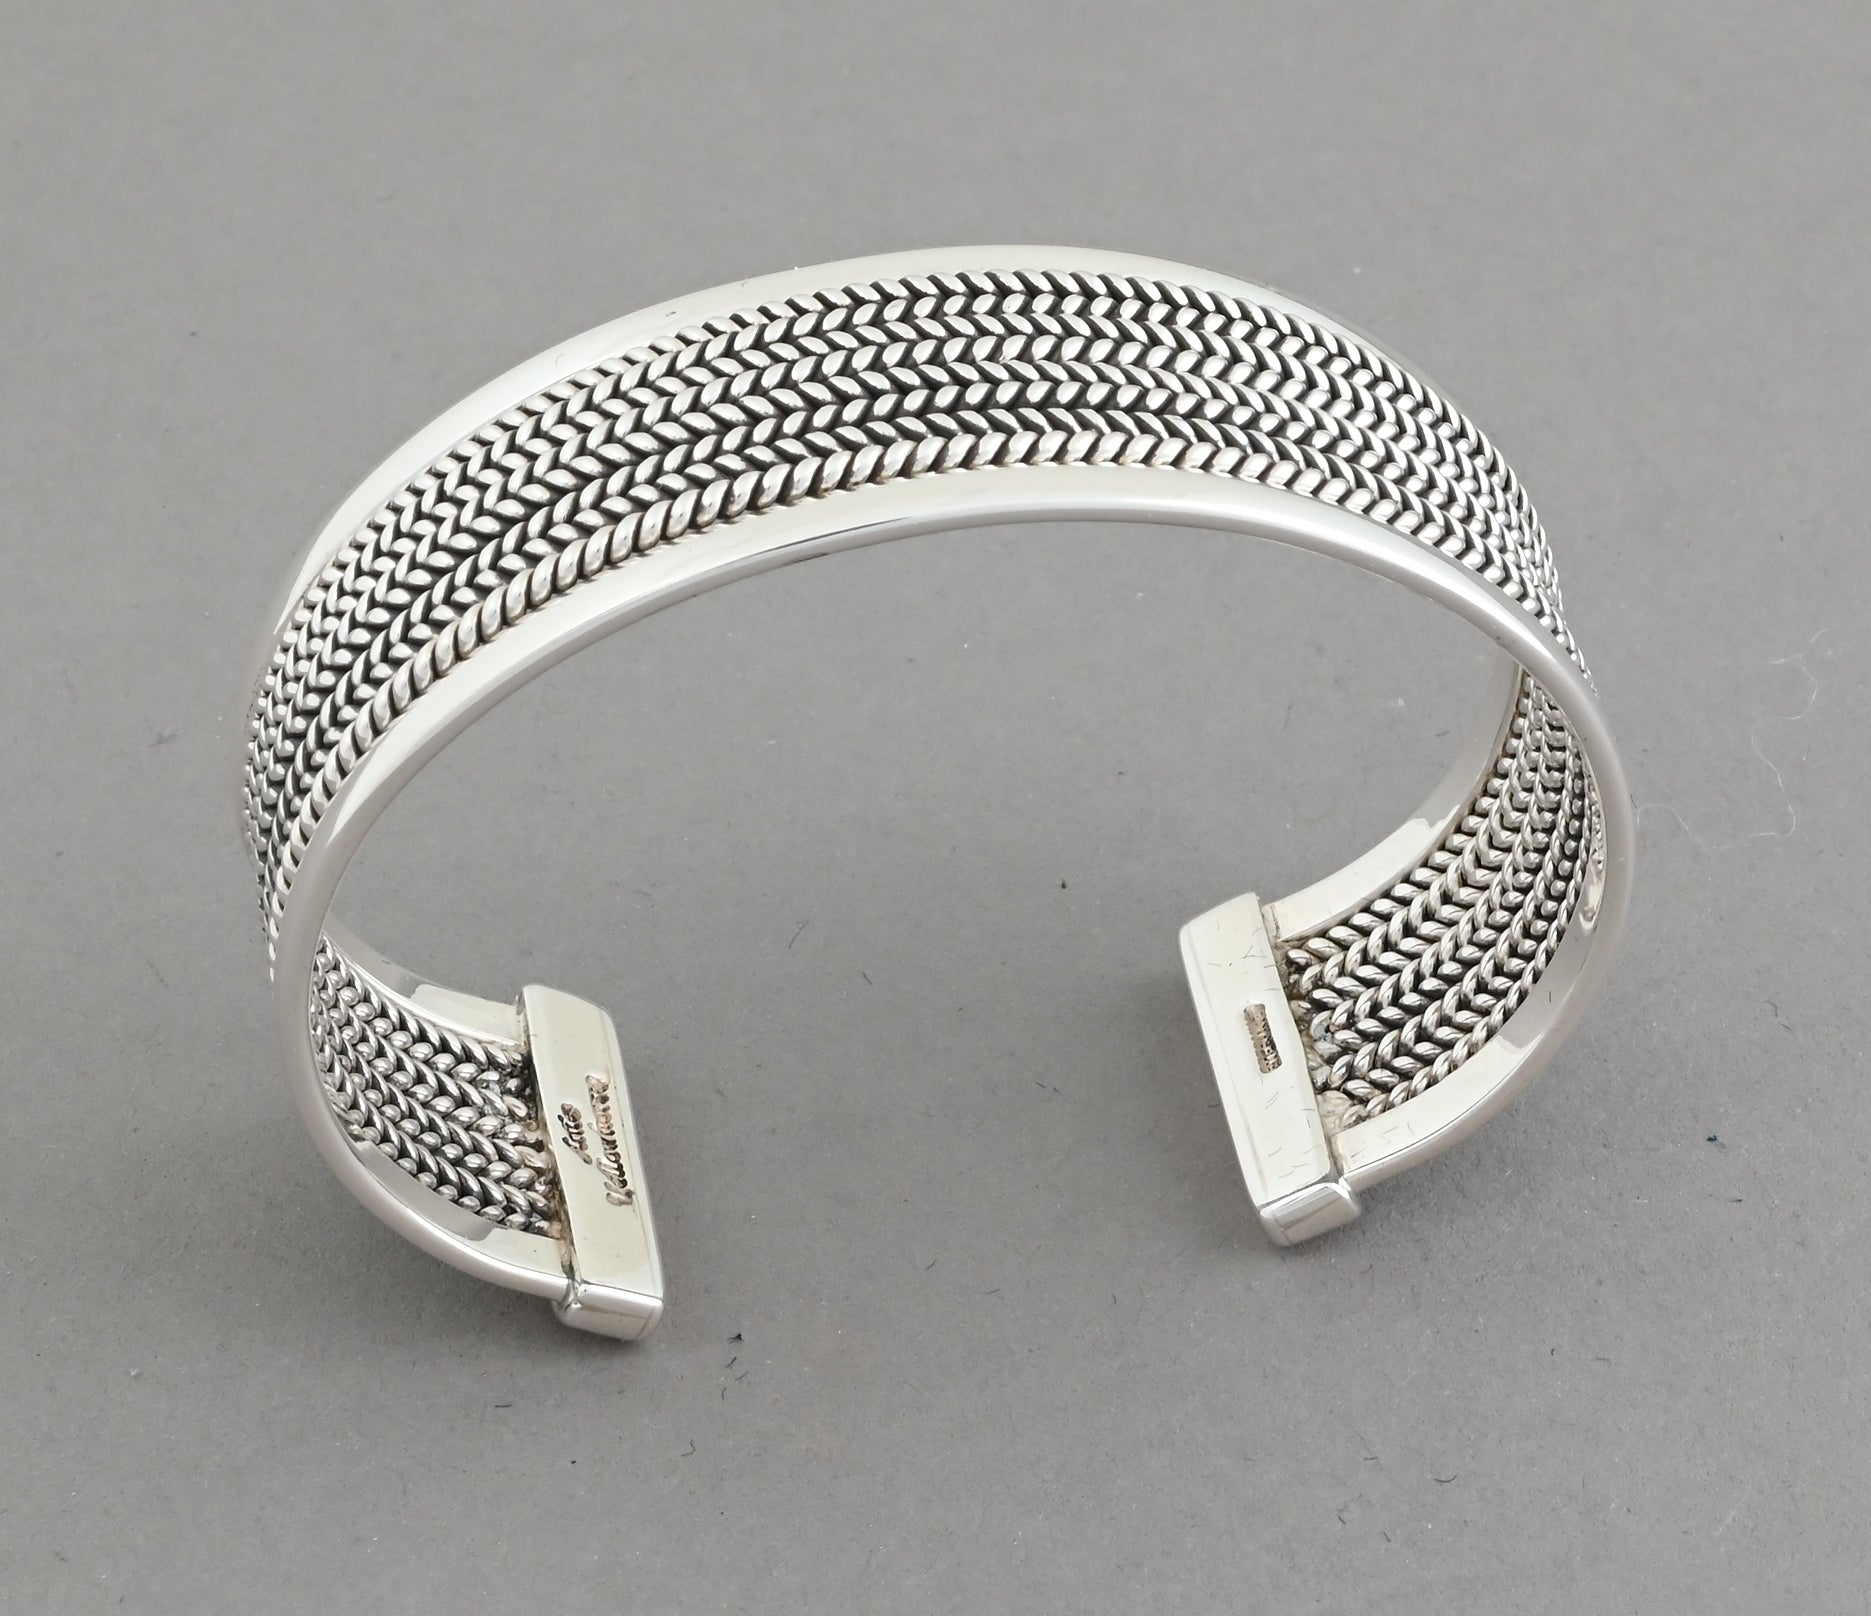 Cuff Bracelet with Eight Twist Wires by Artie Yellowhorse